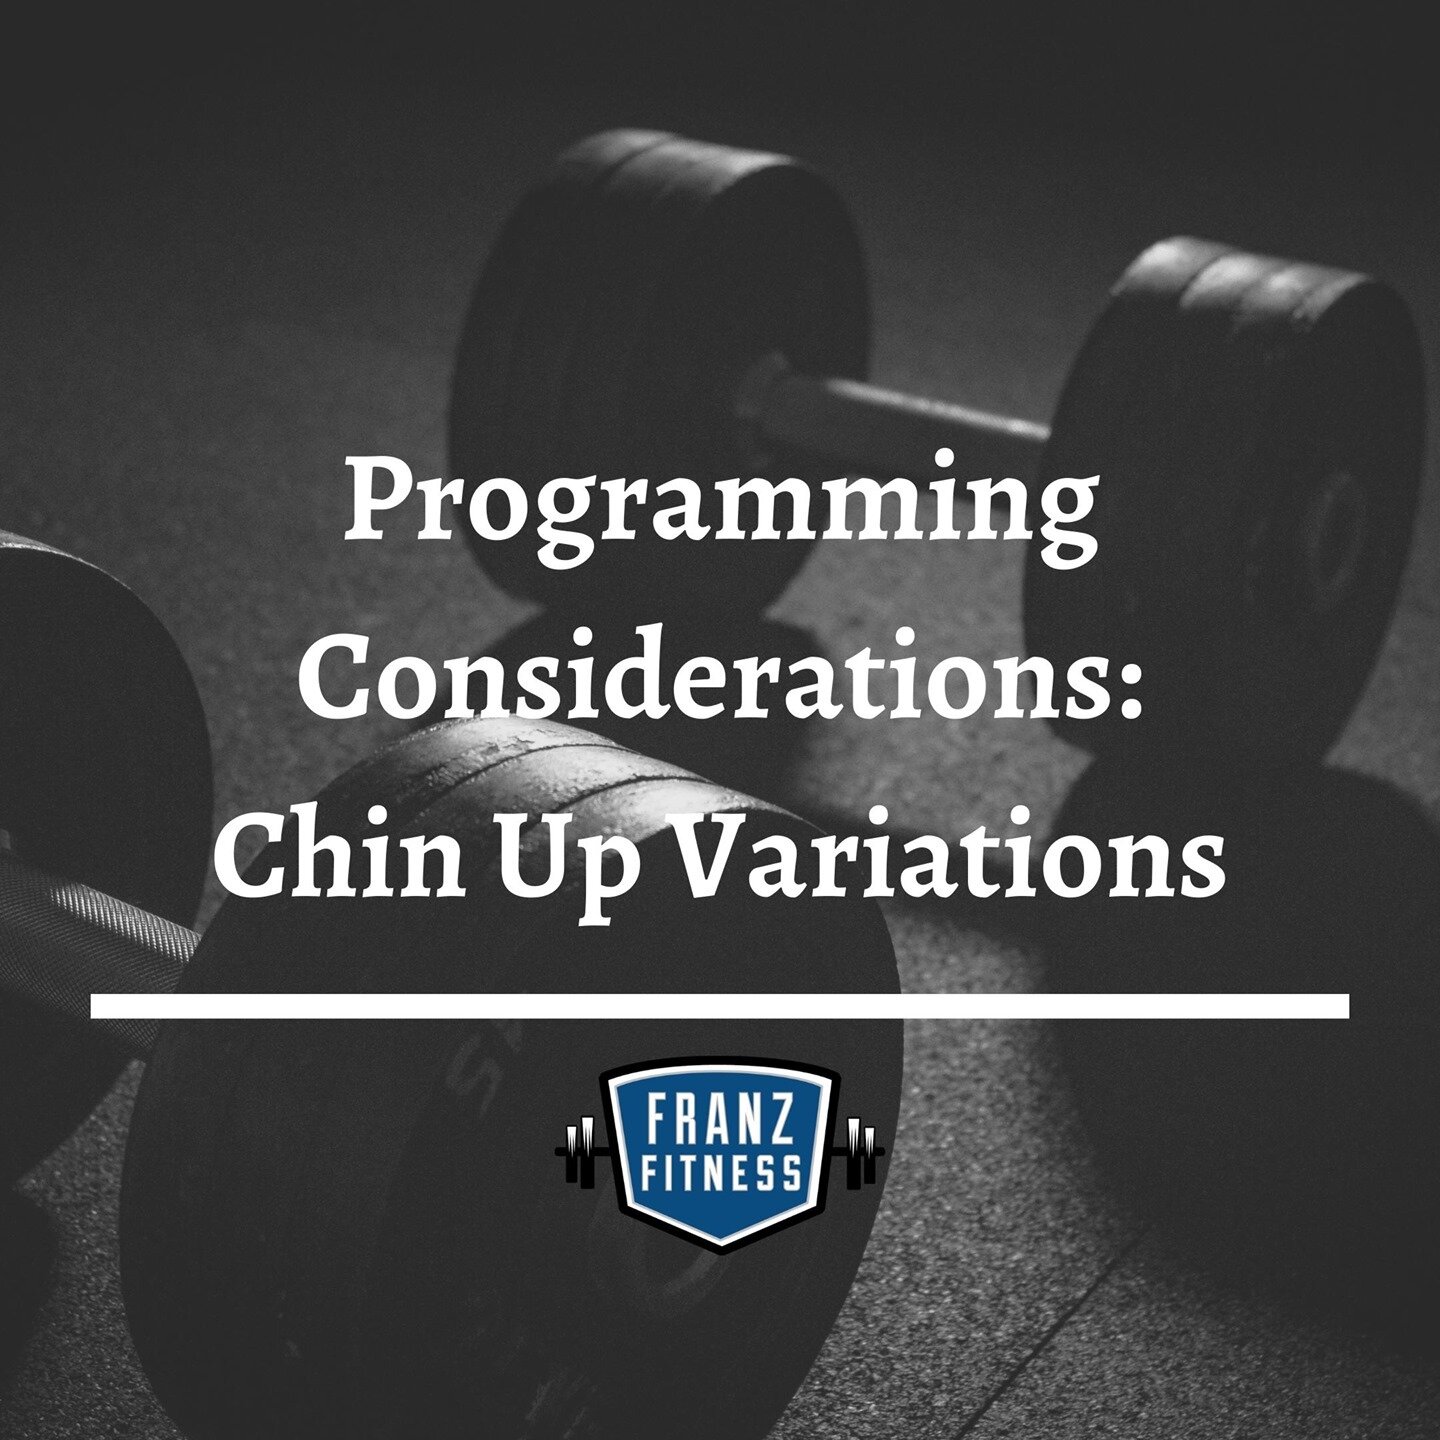 𝐂𝐇𝐈𝐍 𝐔𝐏𝐒!!!⁣⁠
⁣⁠
Chin ups (and all of their variations are great for 𝘴𝘩𝘰𝘶𝘭𝘥𝘦𝘳 𝘩𝘦𝘢𝘭𝘵𝘩 as well as 𝘴𝘺𝘮𝘮𝘦𝘵𝘳𝘺 in your programming.  Not everyone can do chin ups while some people might find traditional chin ups to be too easy.